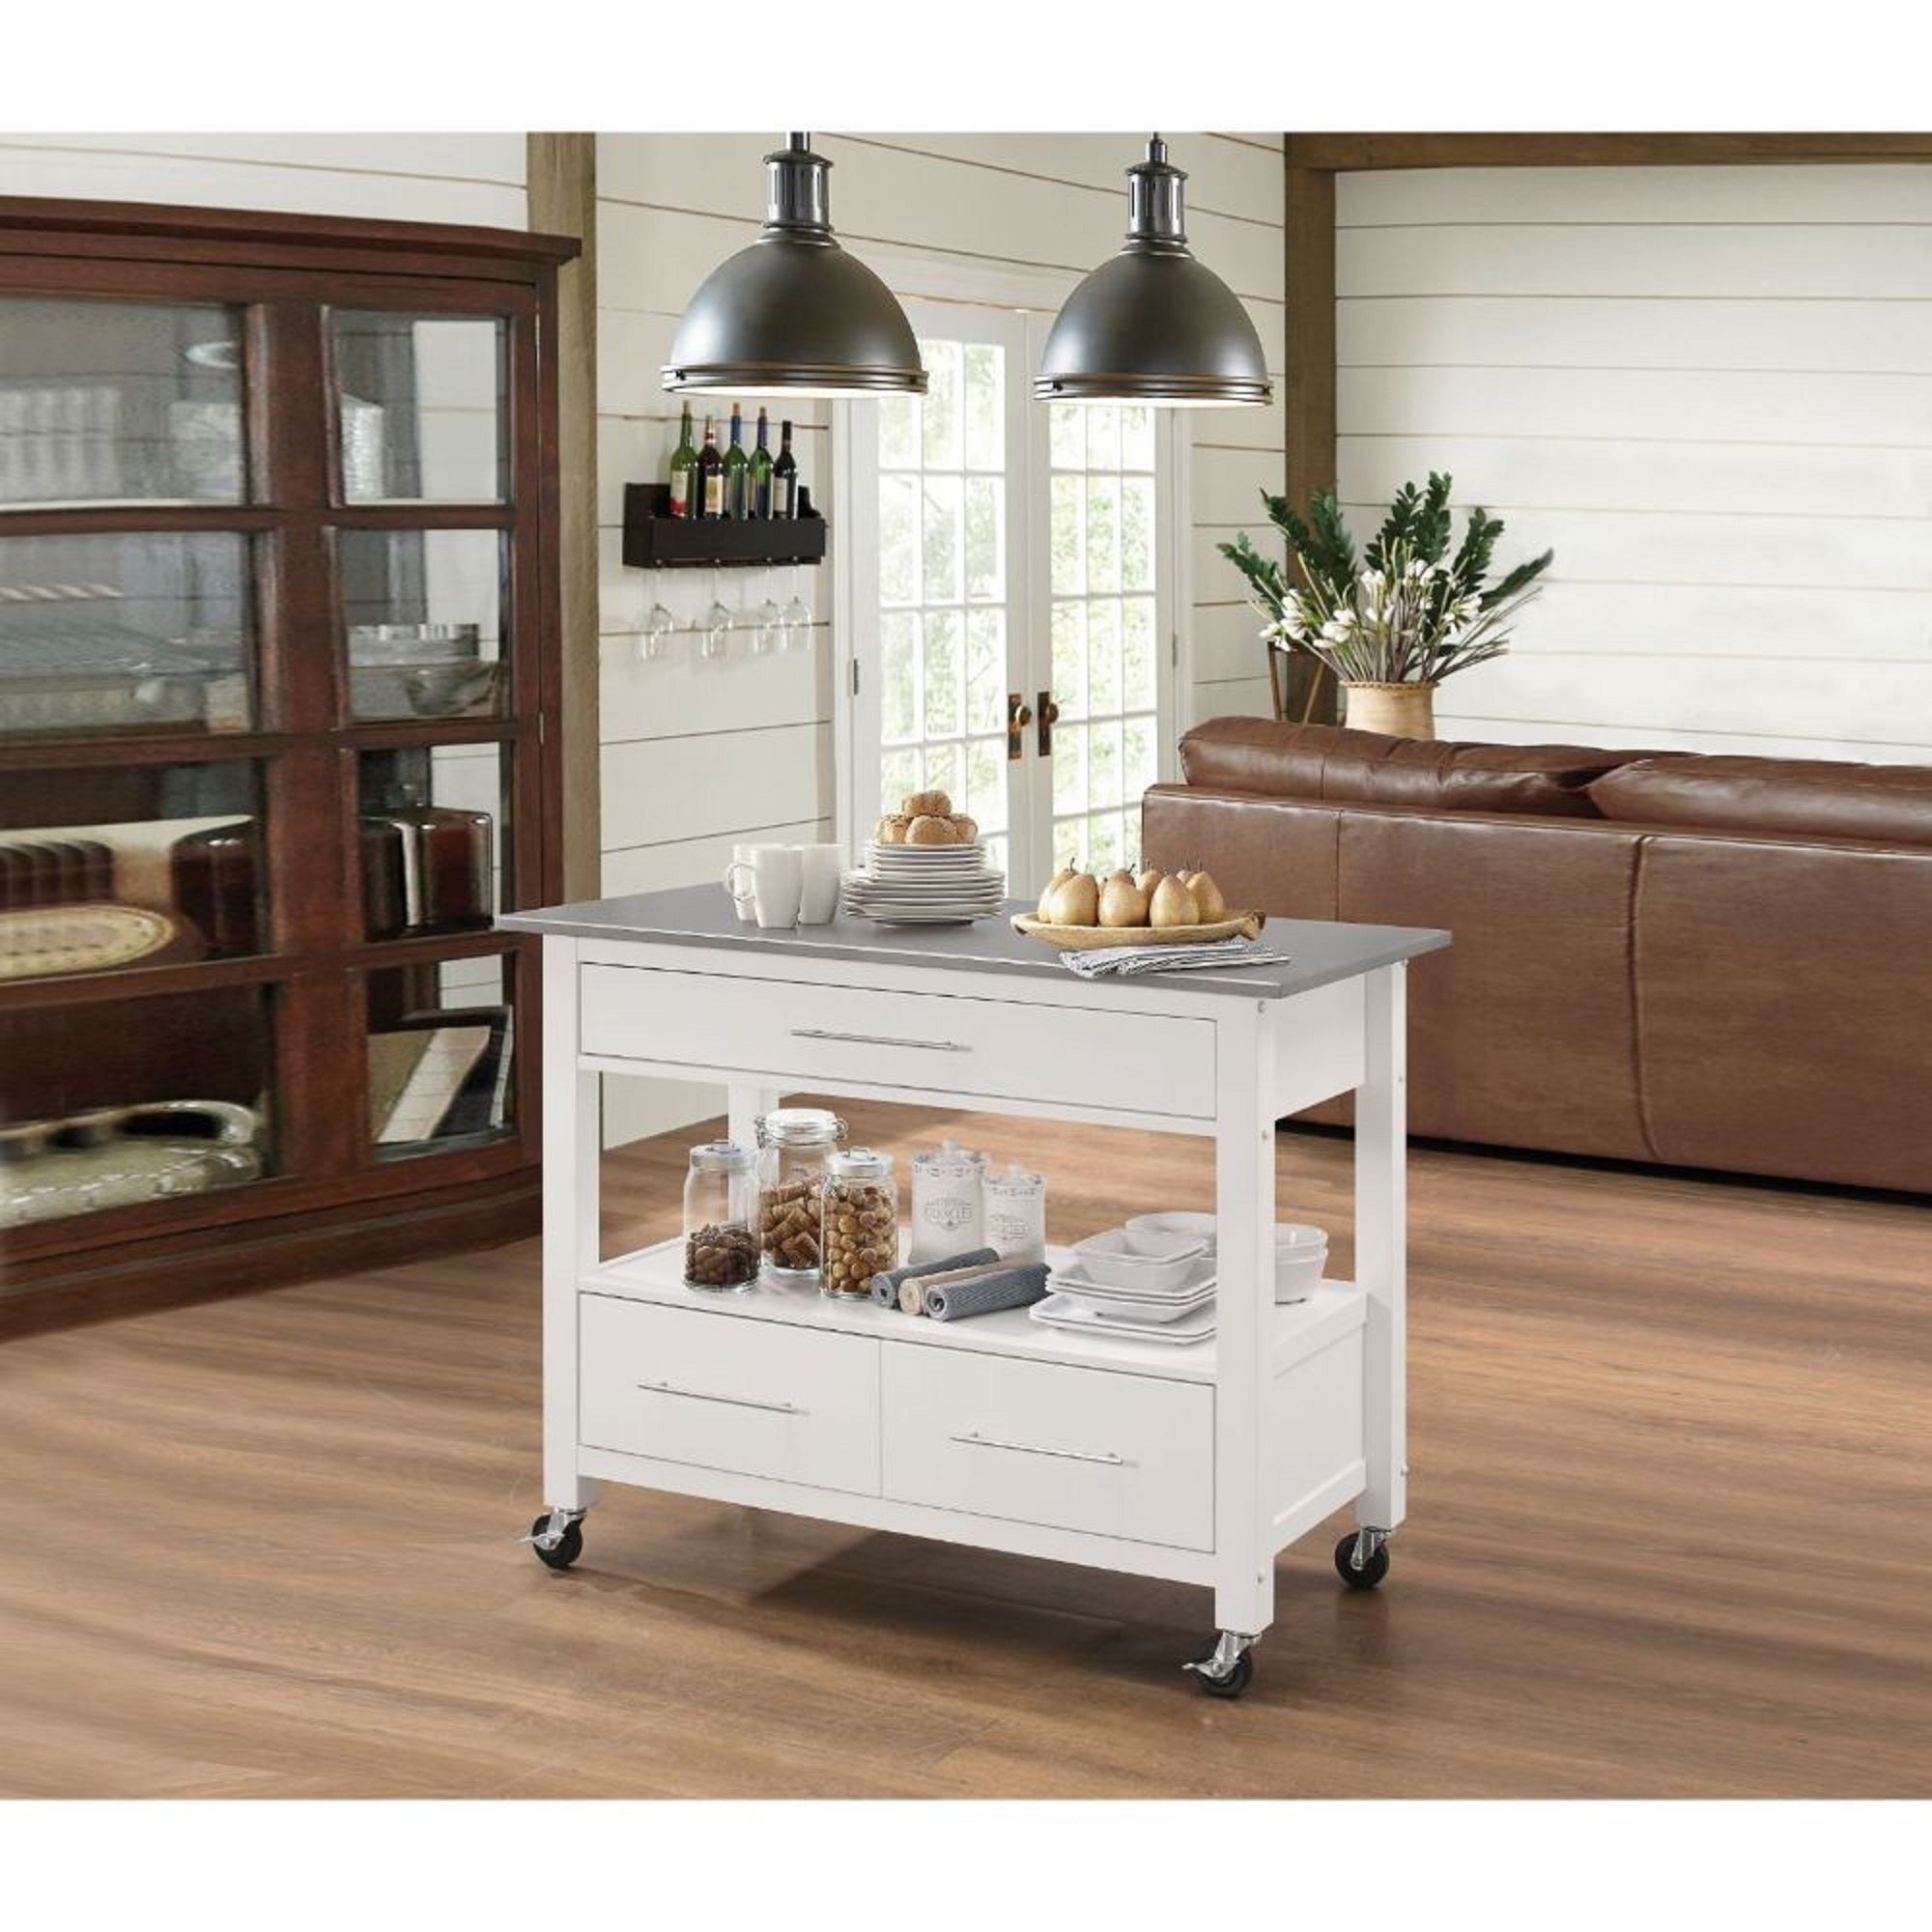 White And Stainless Rolling Kitchen Island Or Bar Cart